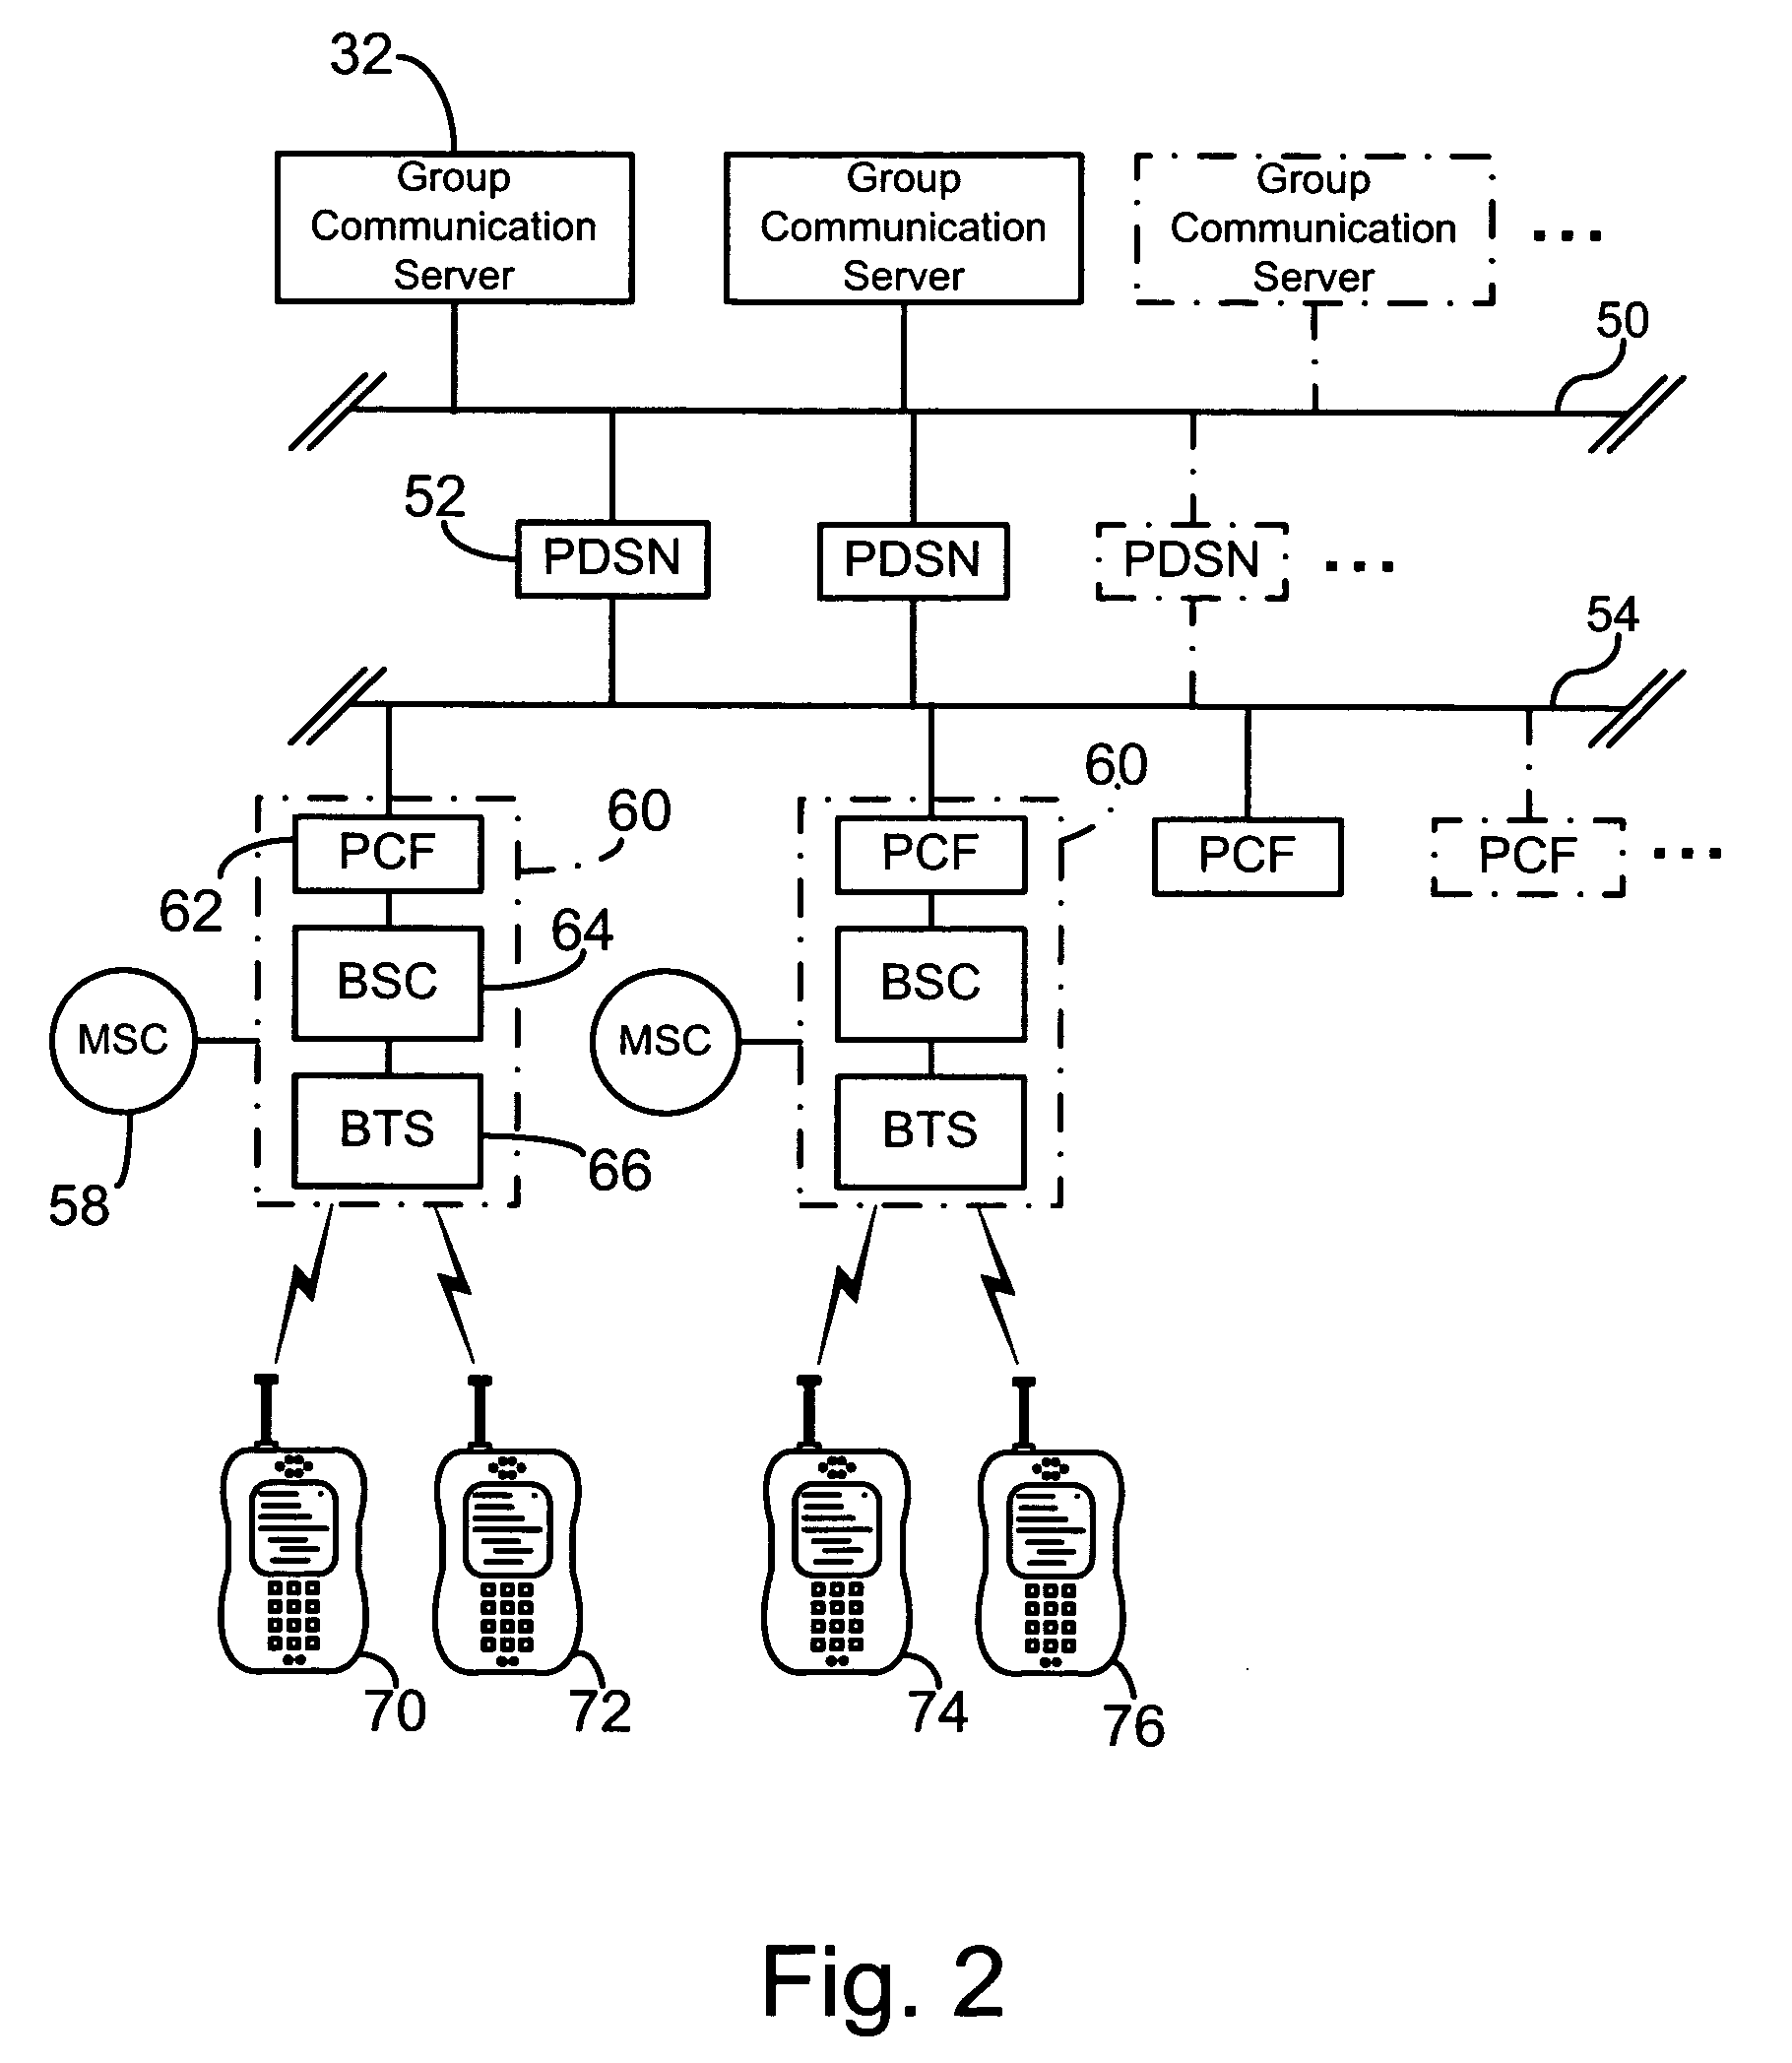 Geographical location information sharing among wireless devices